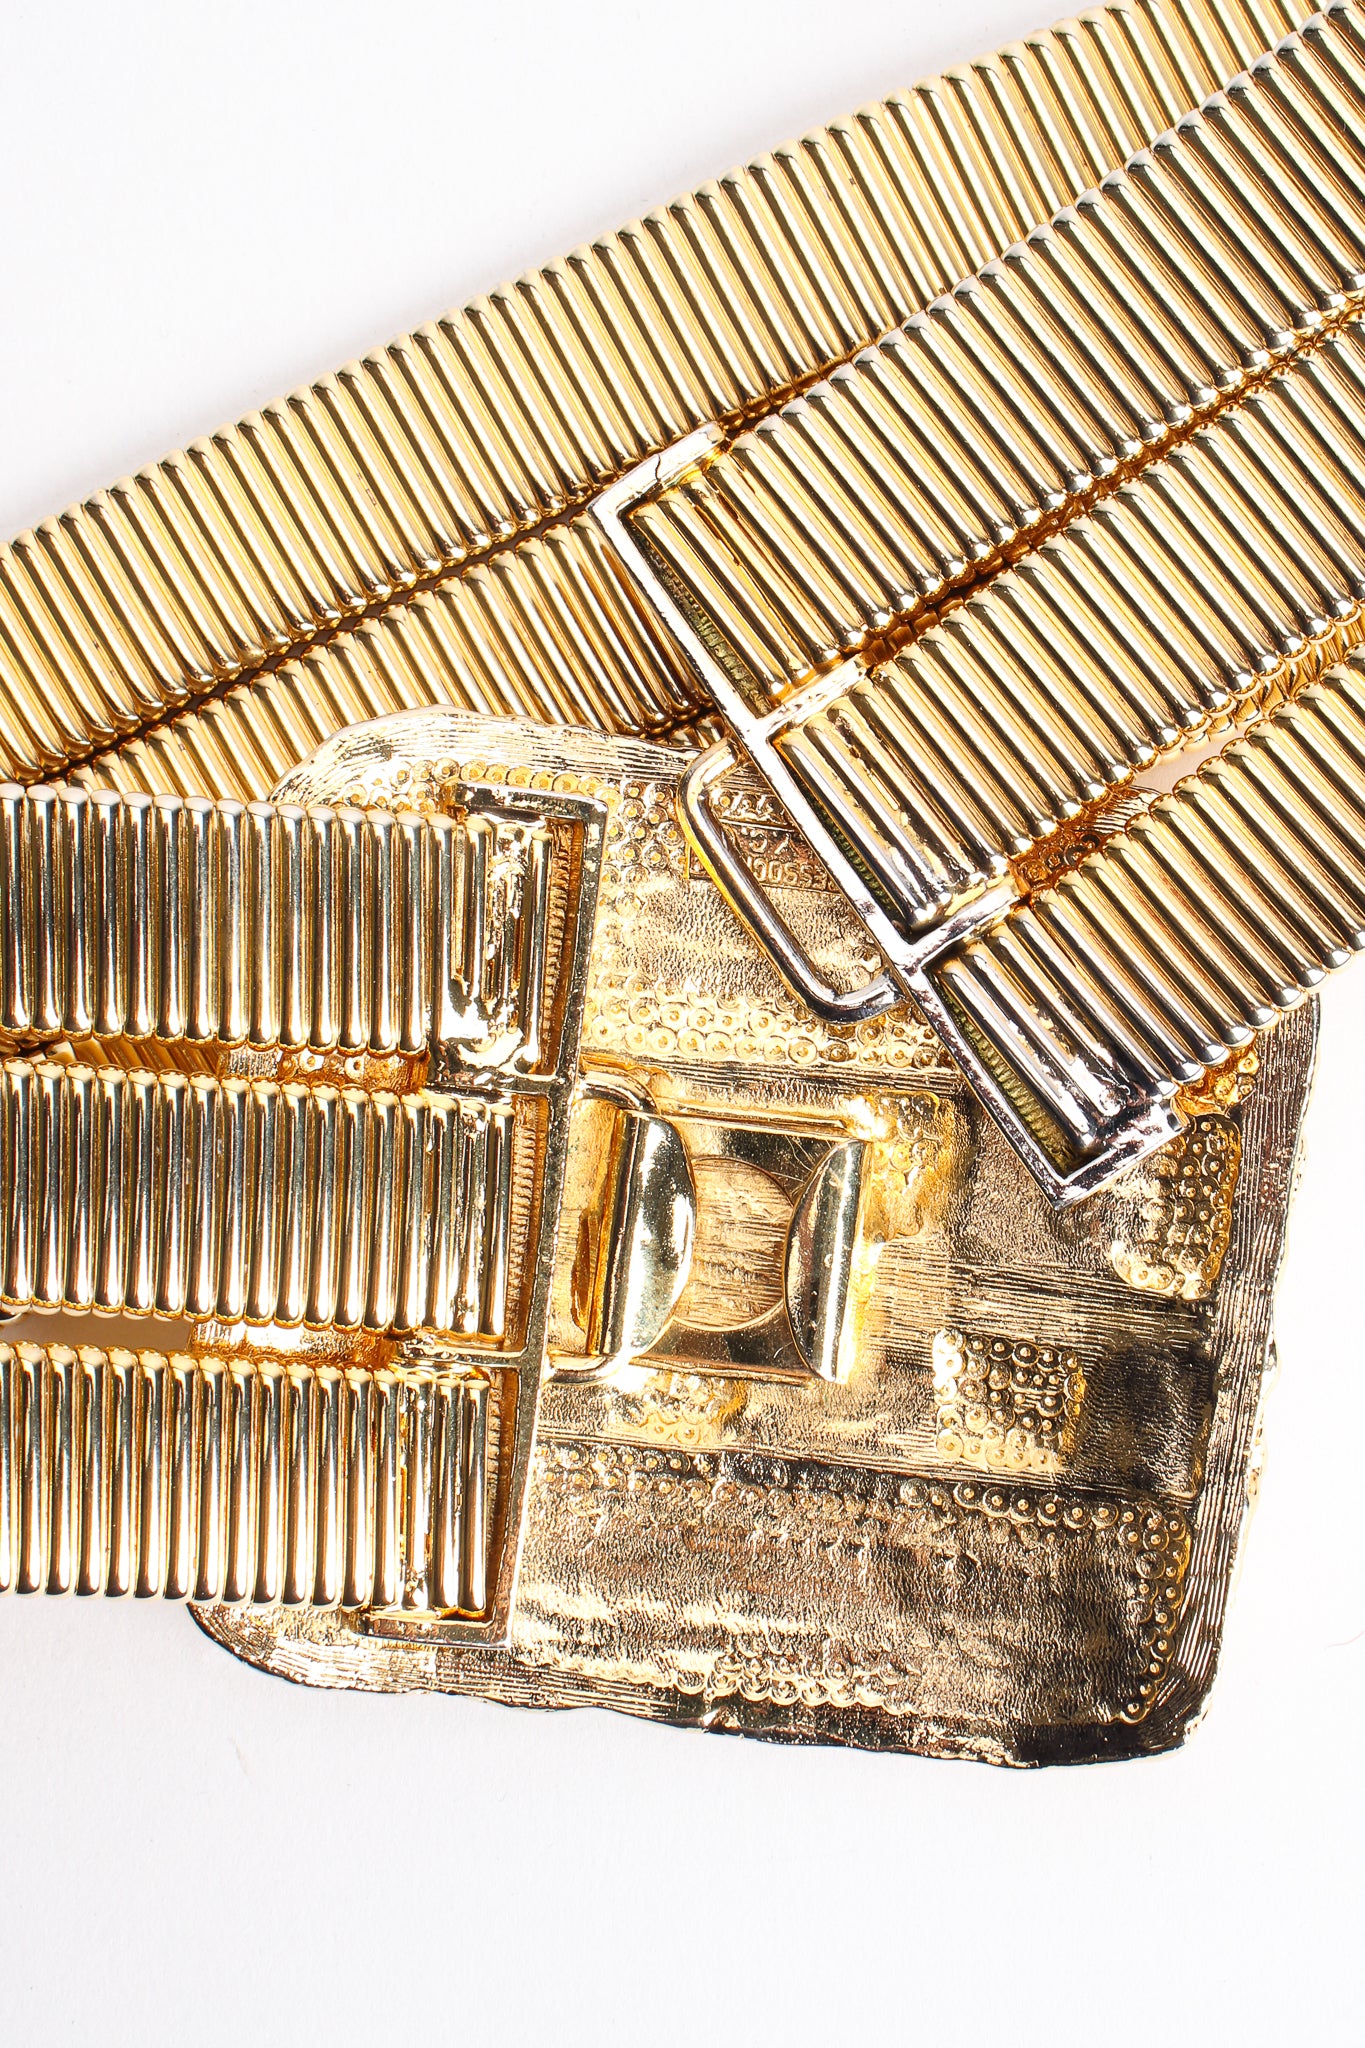 Vintage Accessocraft Gold Fluted Cabochon Buckle Belt detail at Recess Los Angeles